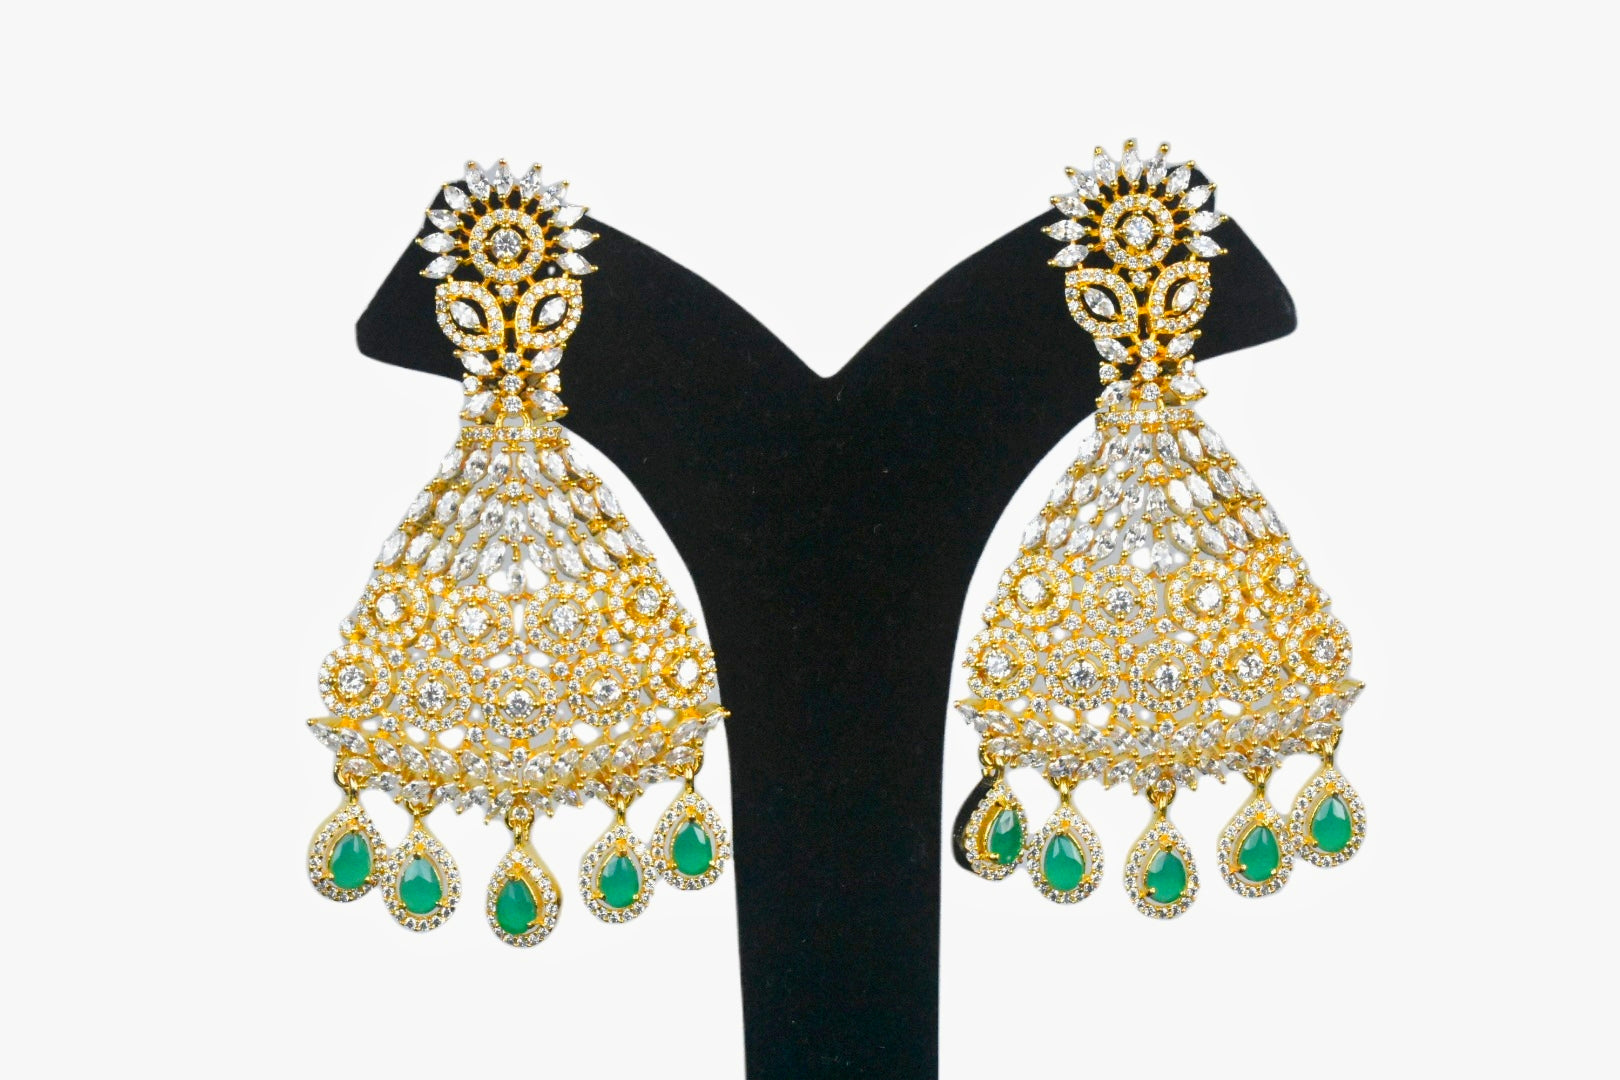 22K Gold Earrings For Women With Cz , Emerald & Pearls - 235-GER13057 in  4.000 Grams